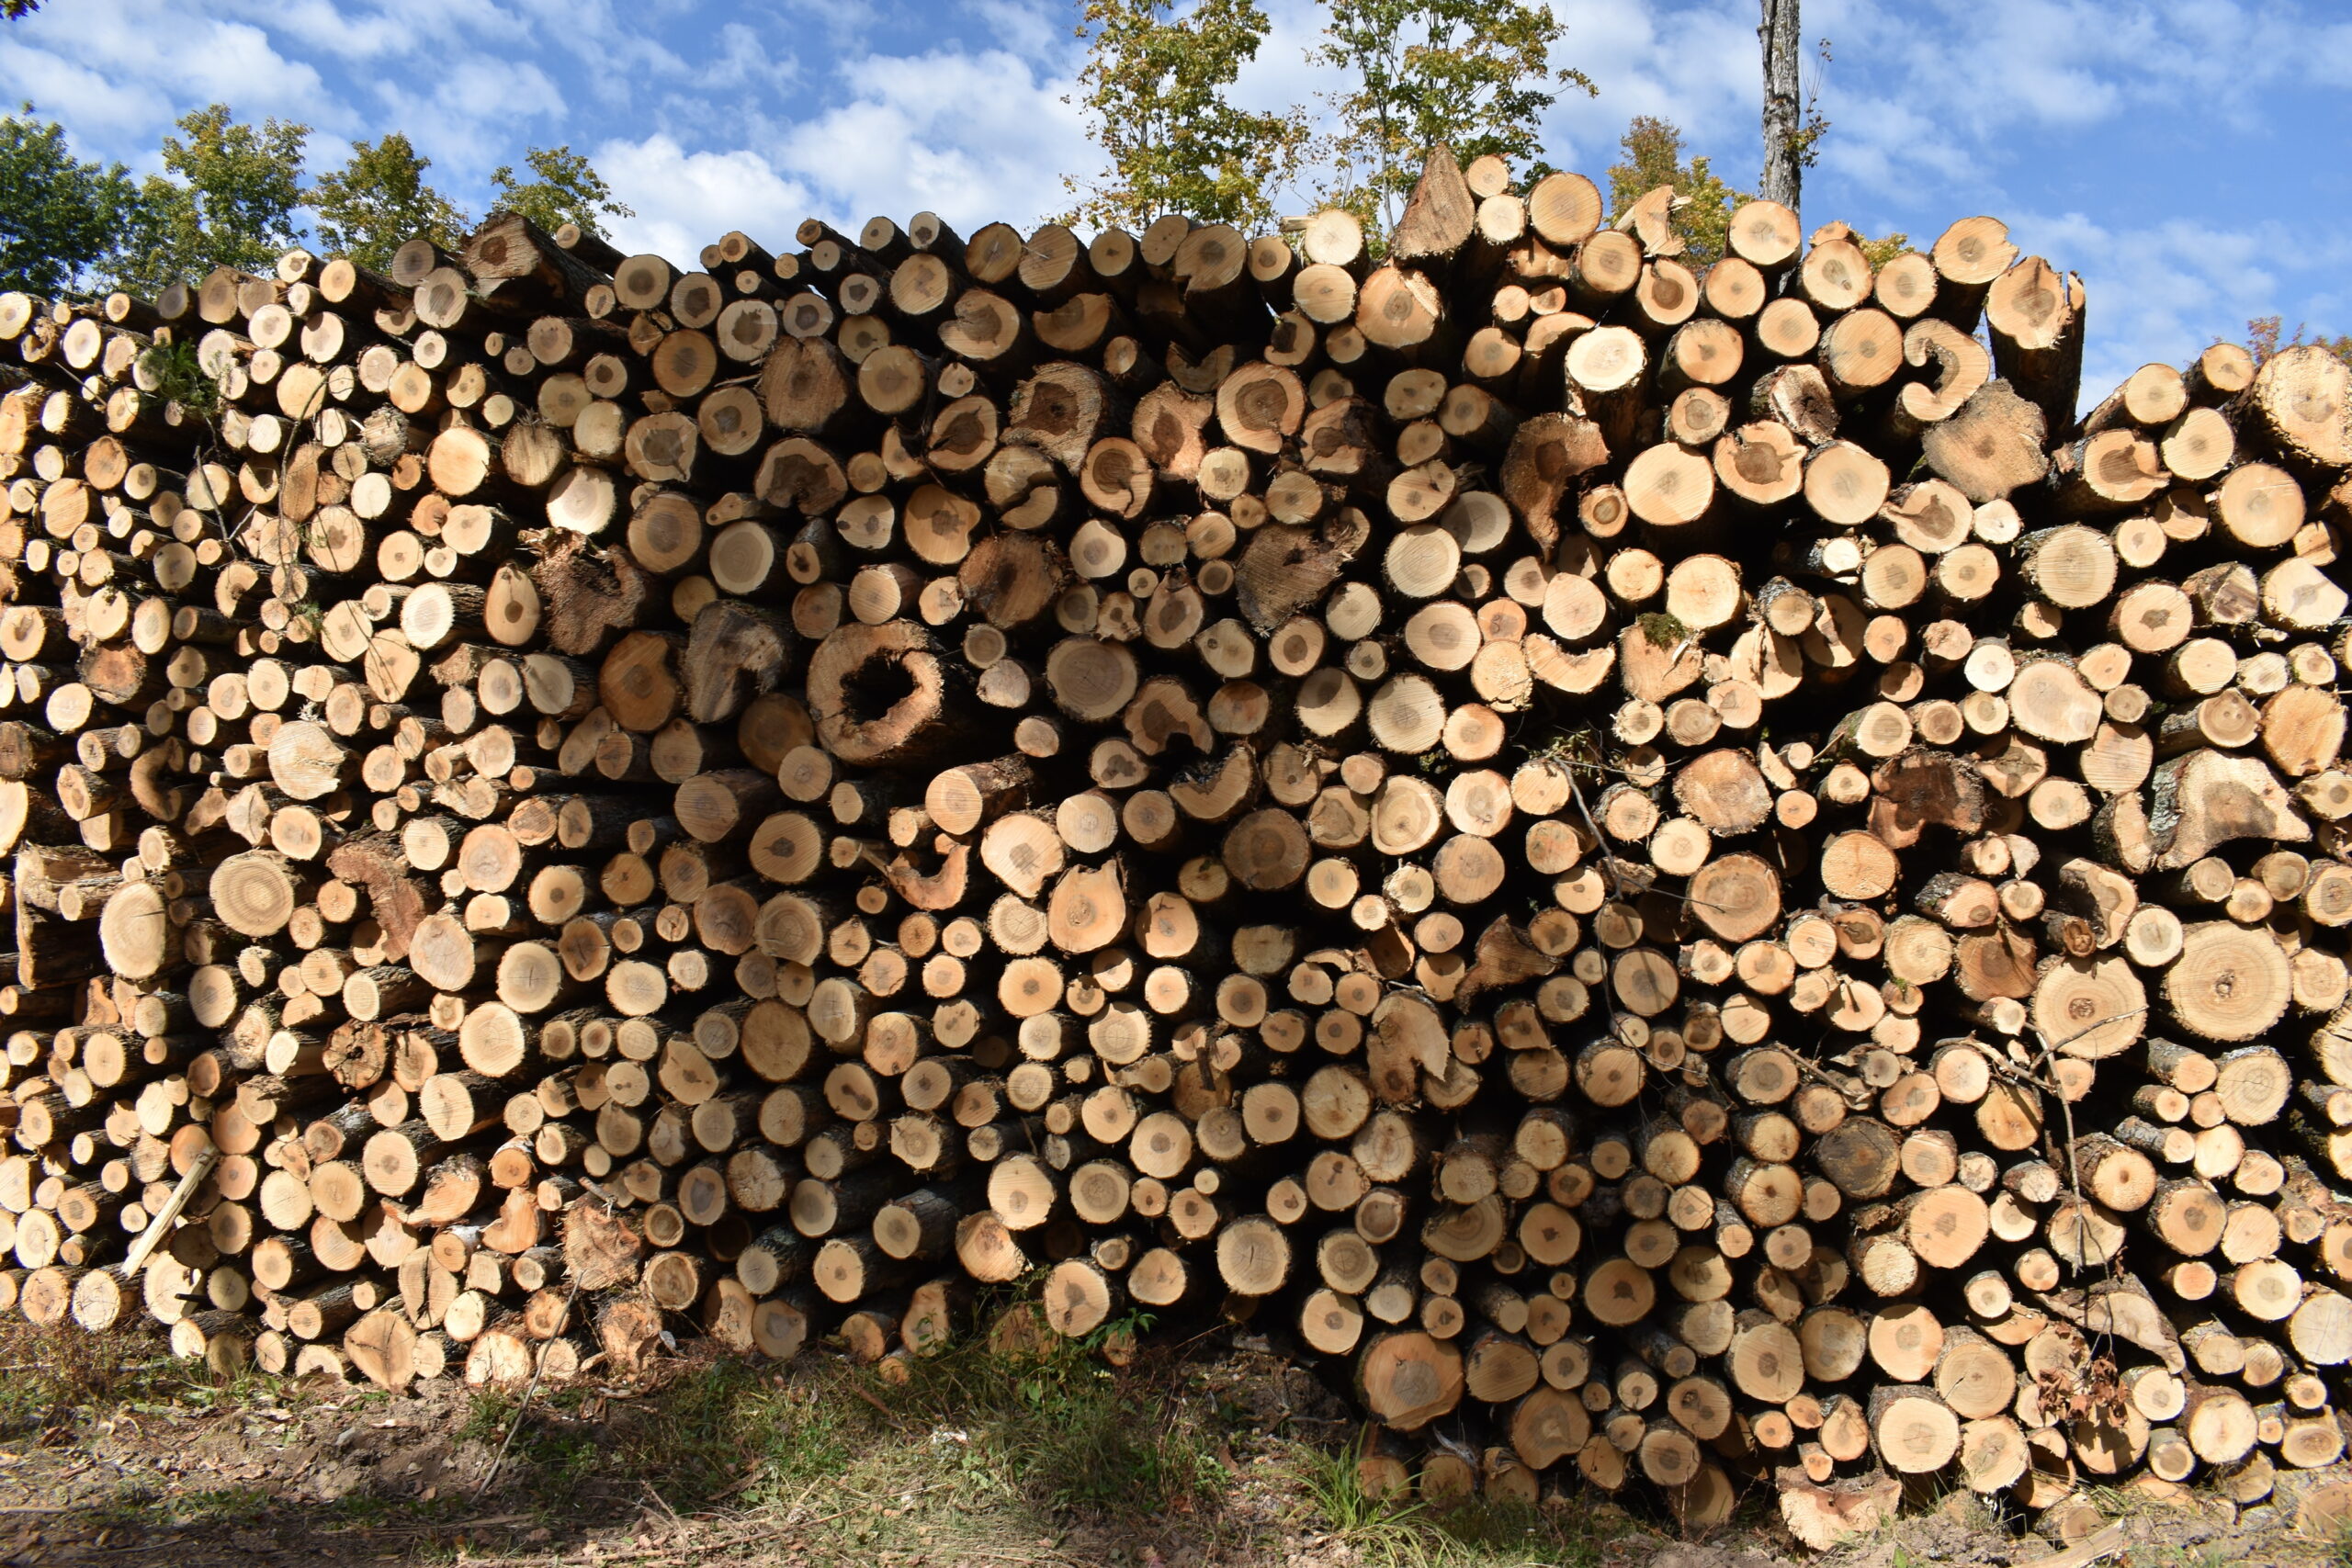 Mixed hardwood timber is stacked at a logging site in Elcho